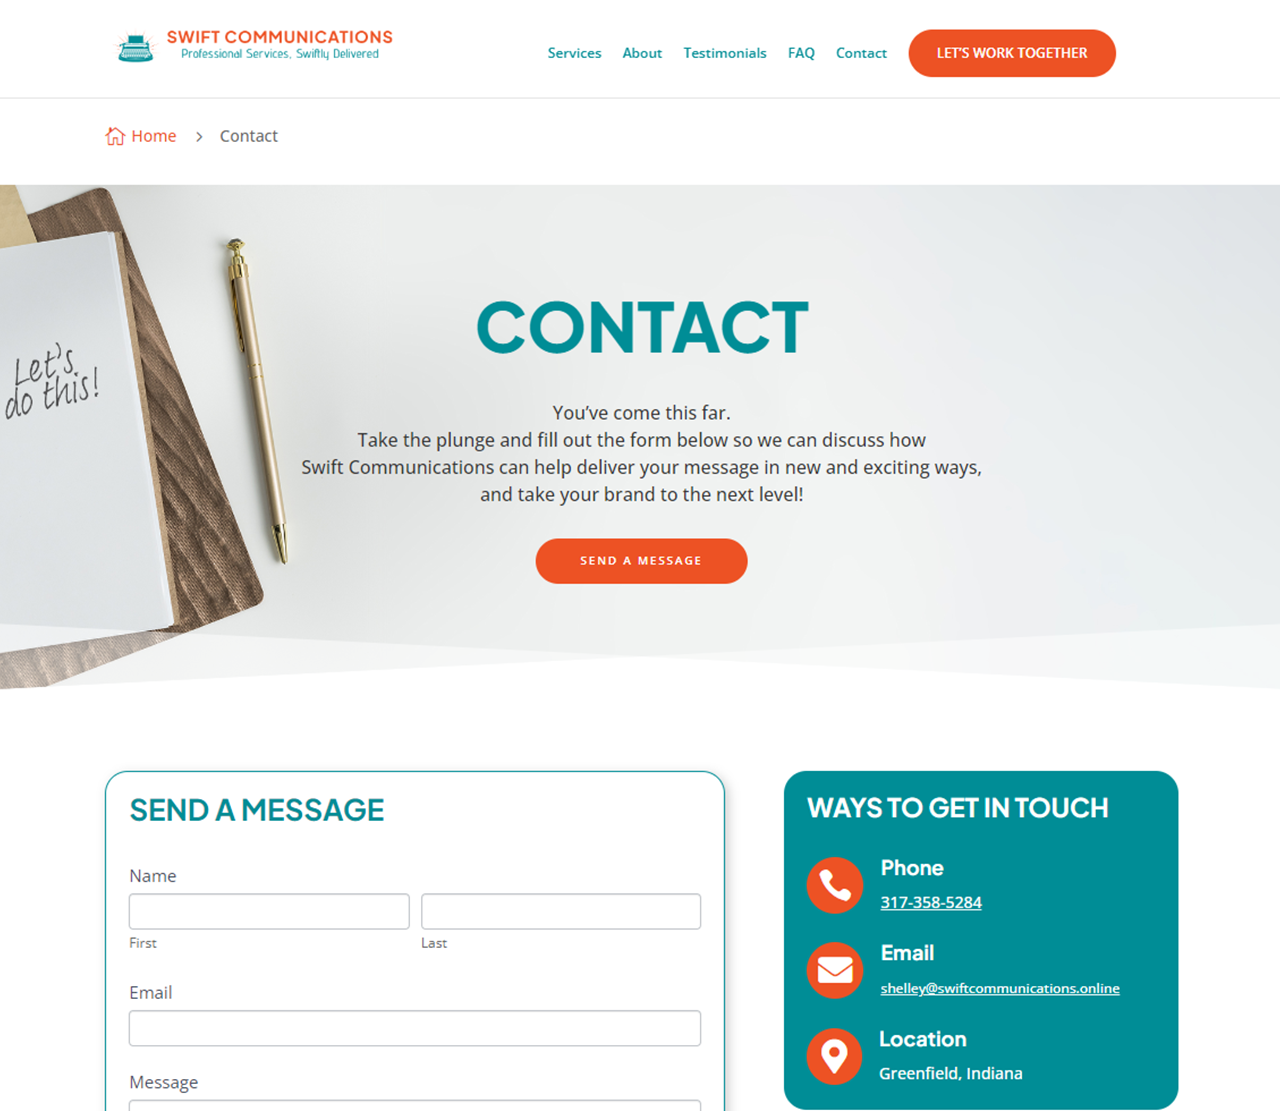 Swift Communications Website Contact Page